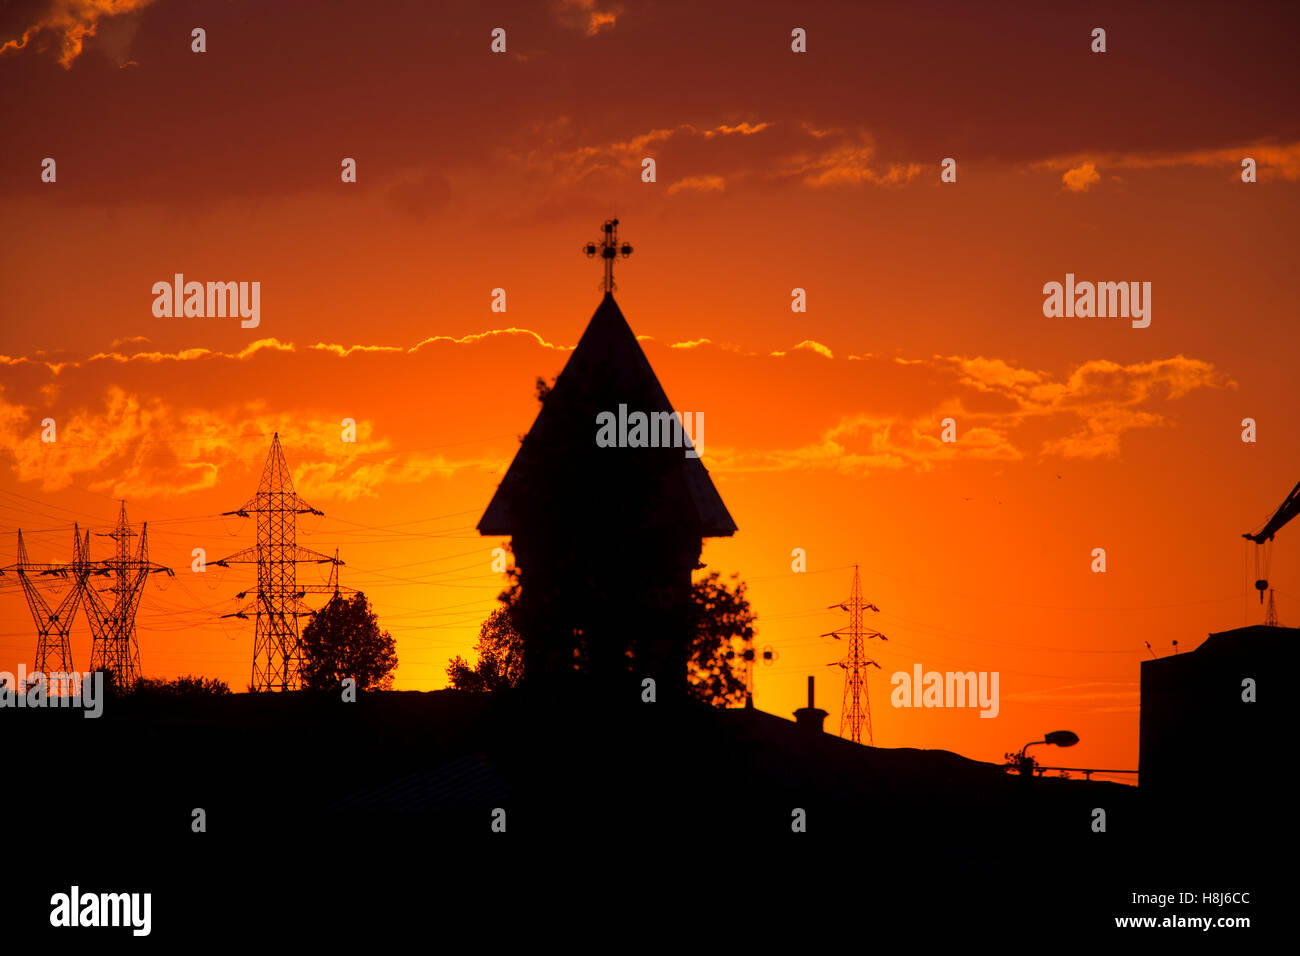 Sunset over the town with church tower, Tulcea, Romania. Stock Photo